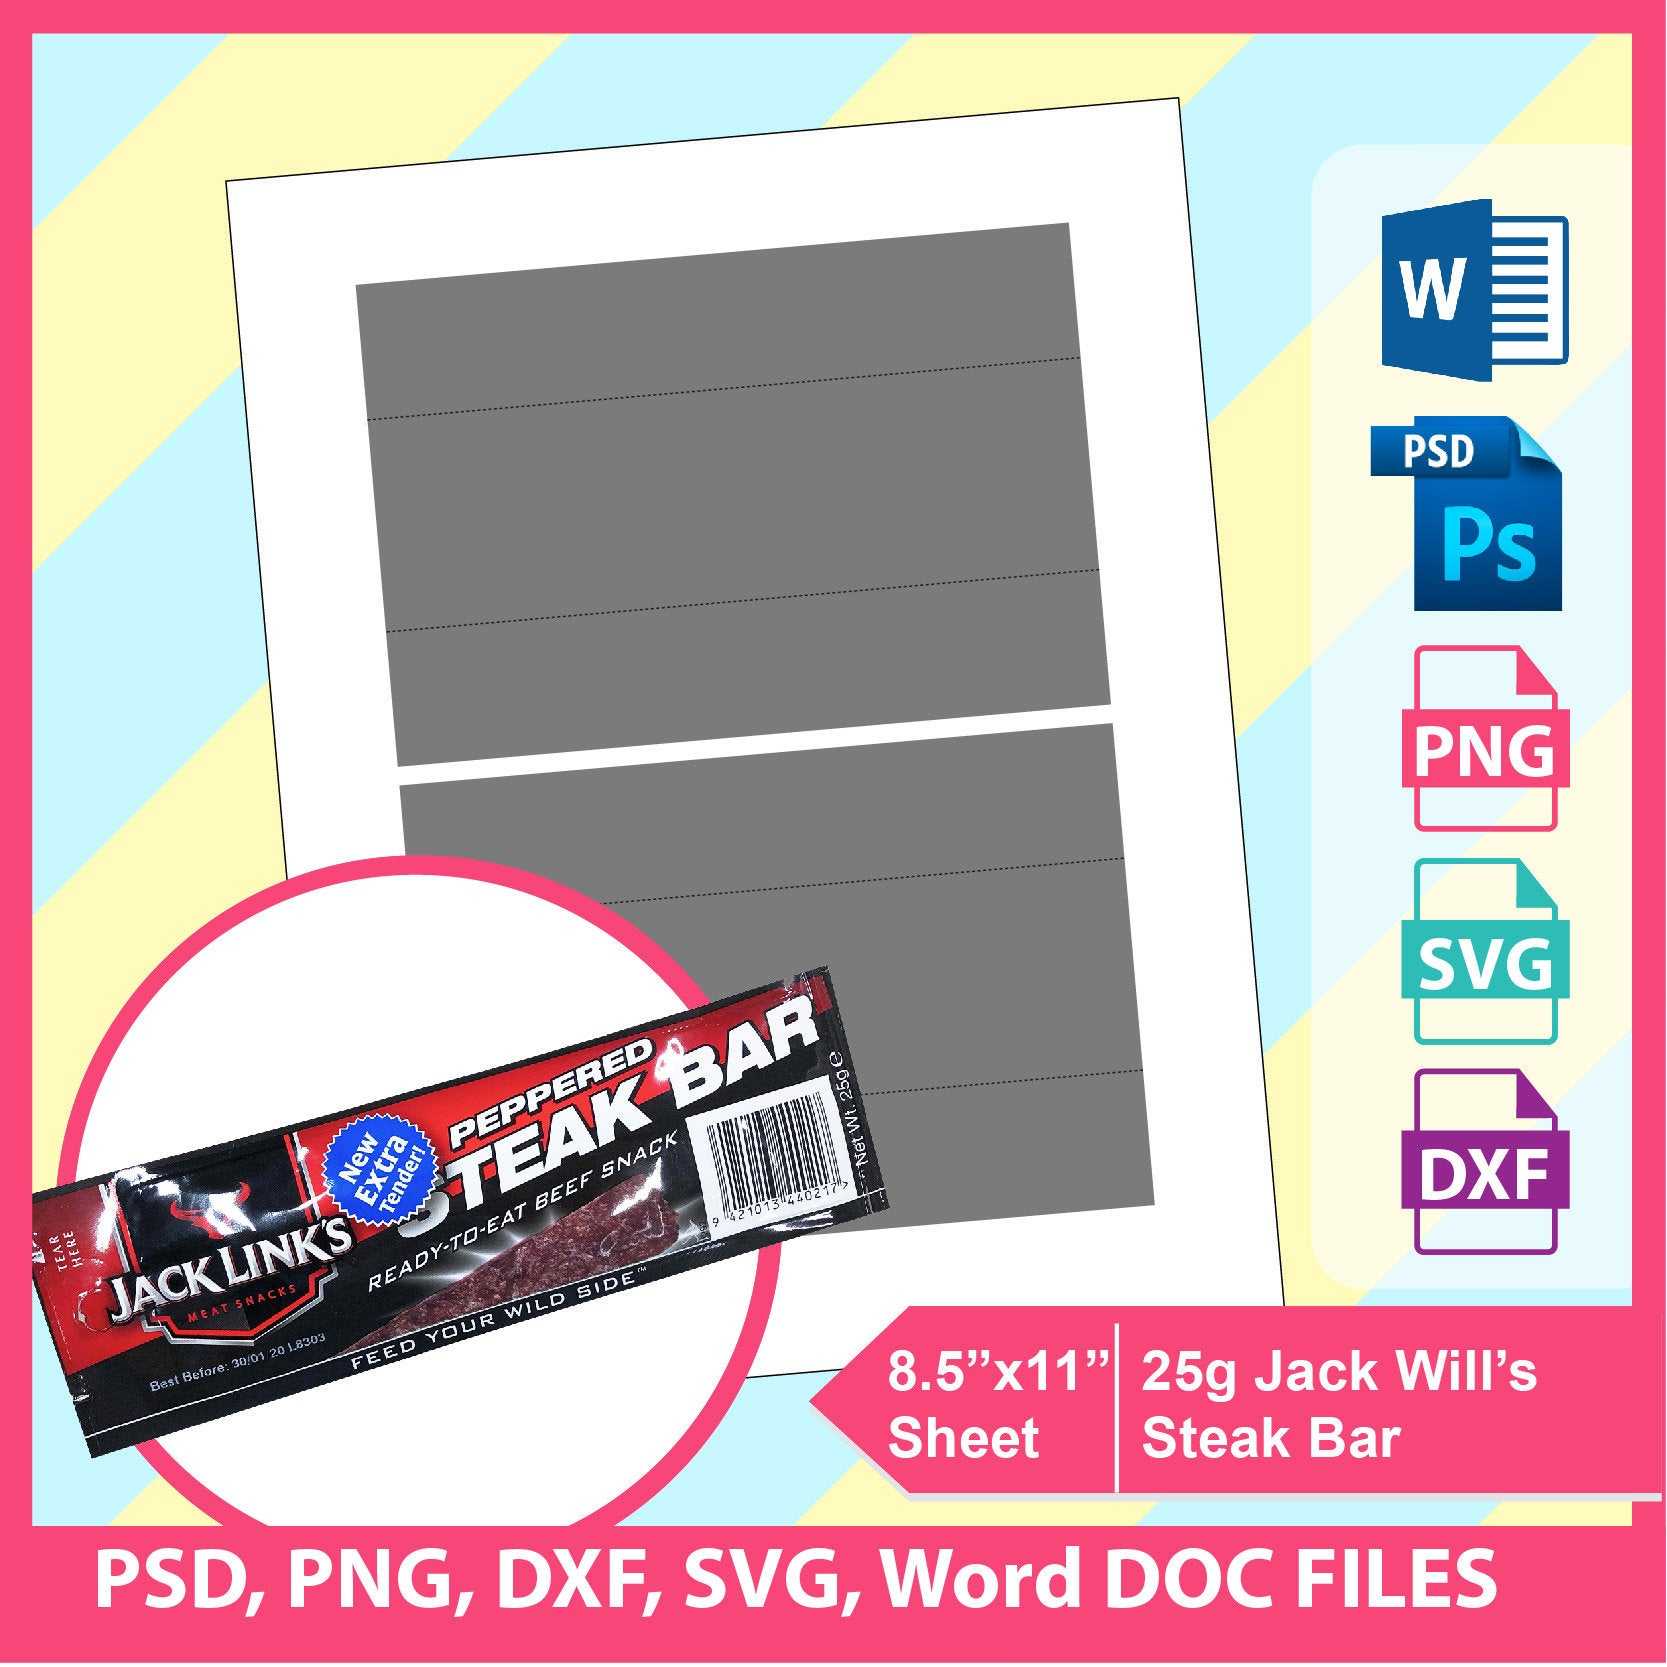 Jack Link's Steak Bar Wrapper Template, Psd, Png And Svg, Dxf, Doc  Microsoft Word Formats, 8.5X11" Sheet, Printable 679 With Regard To Blank Candy Bar Wrapper Template For Word